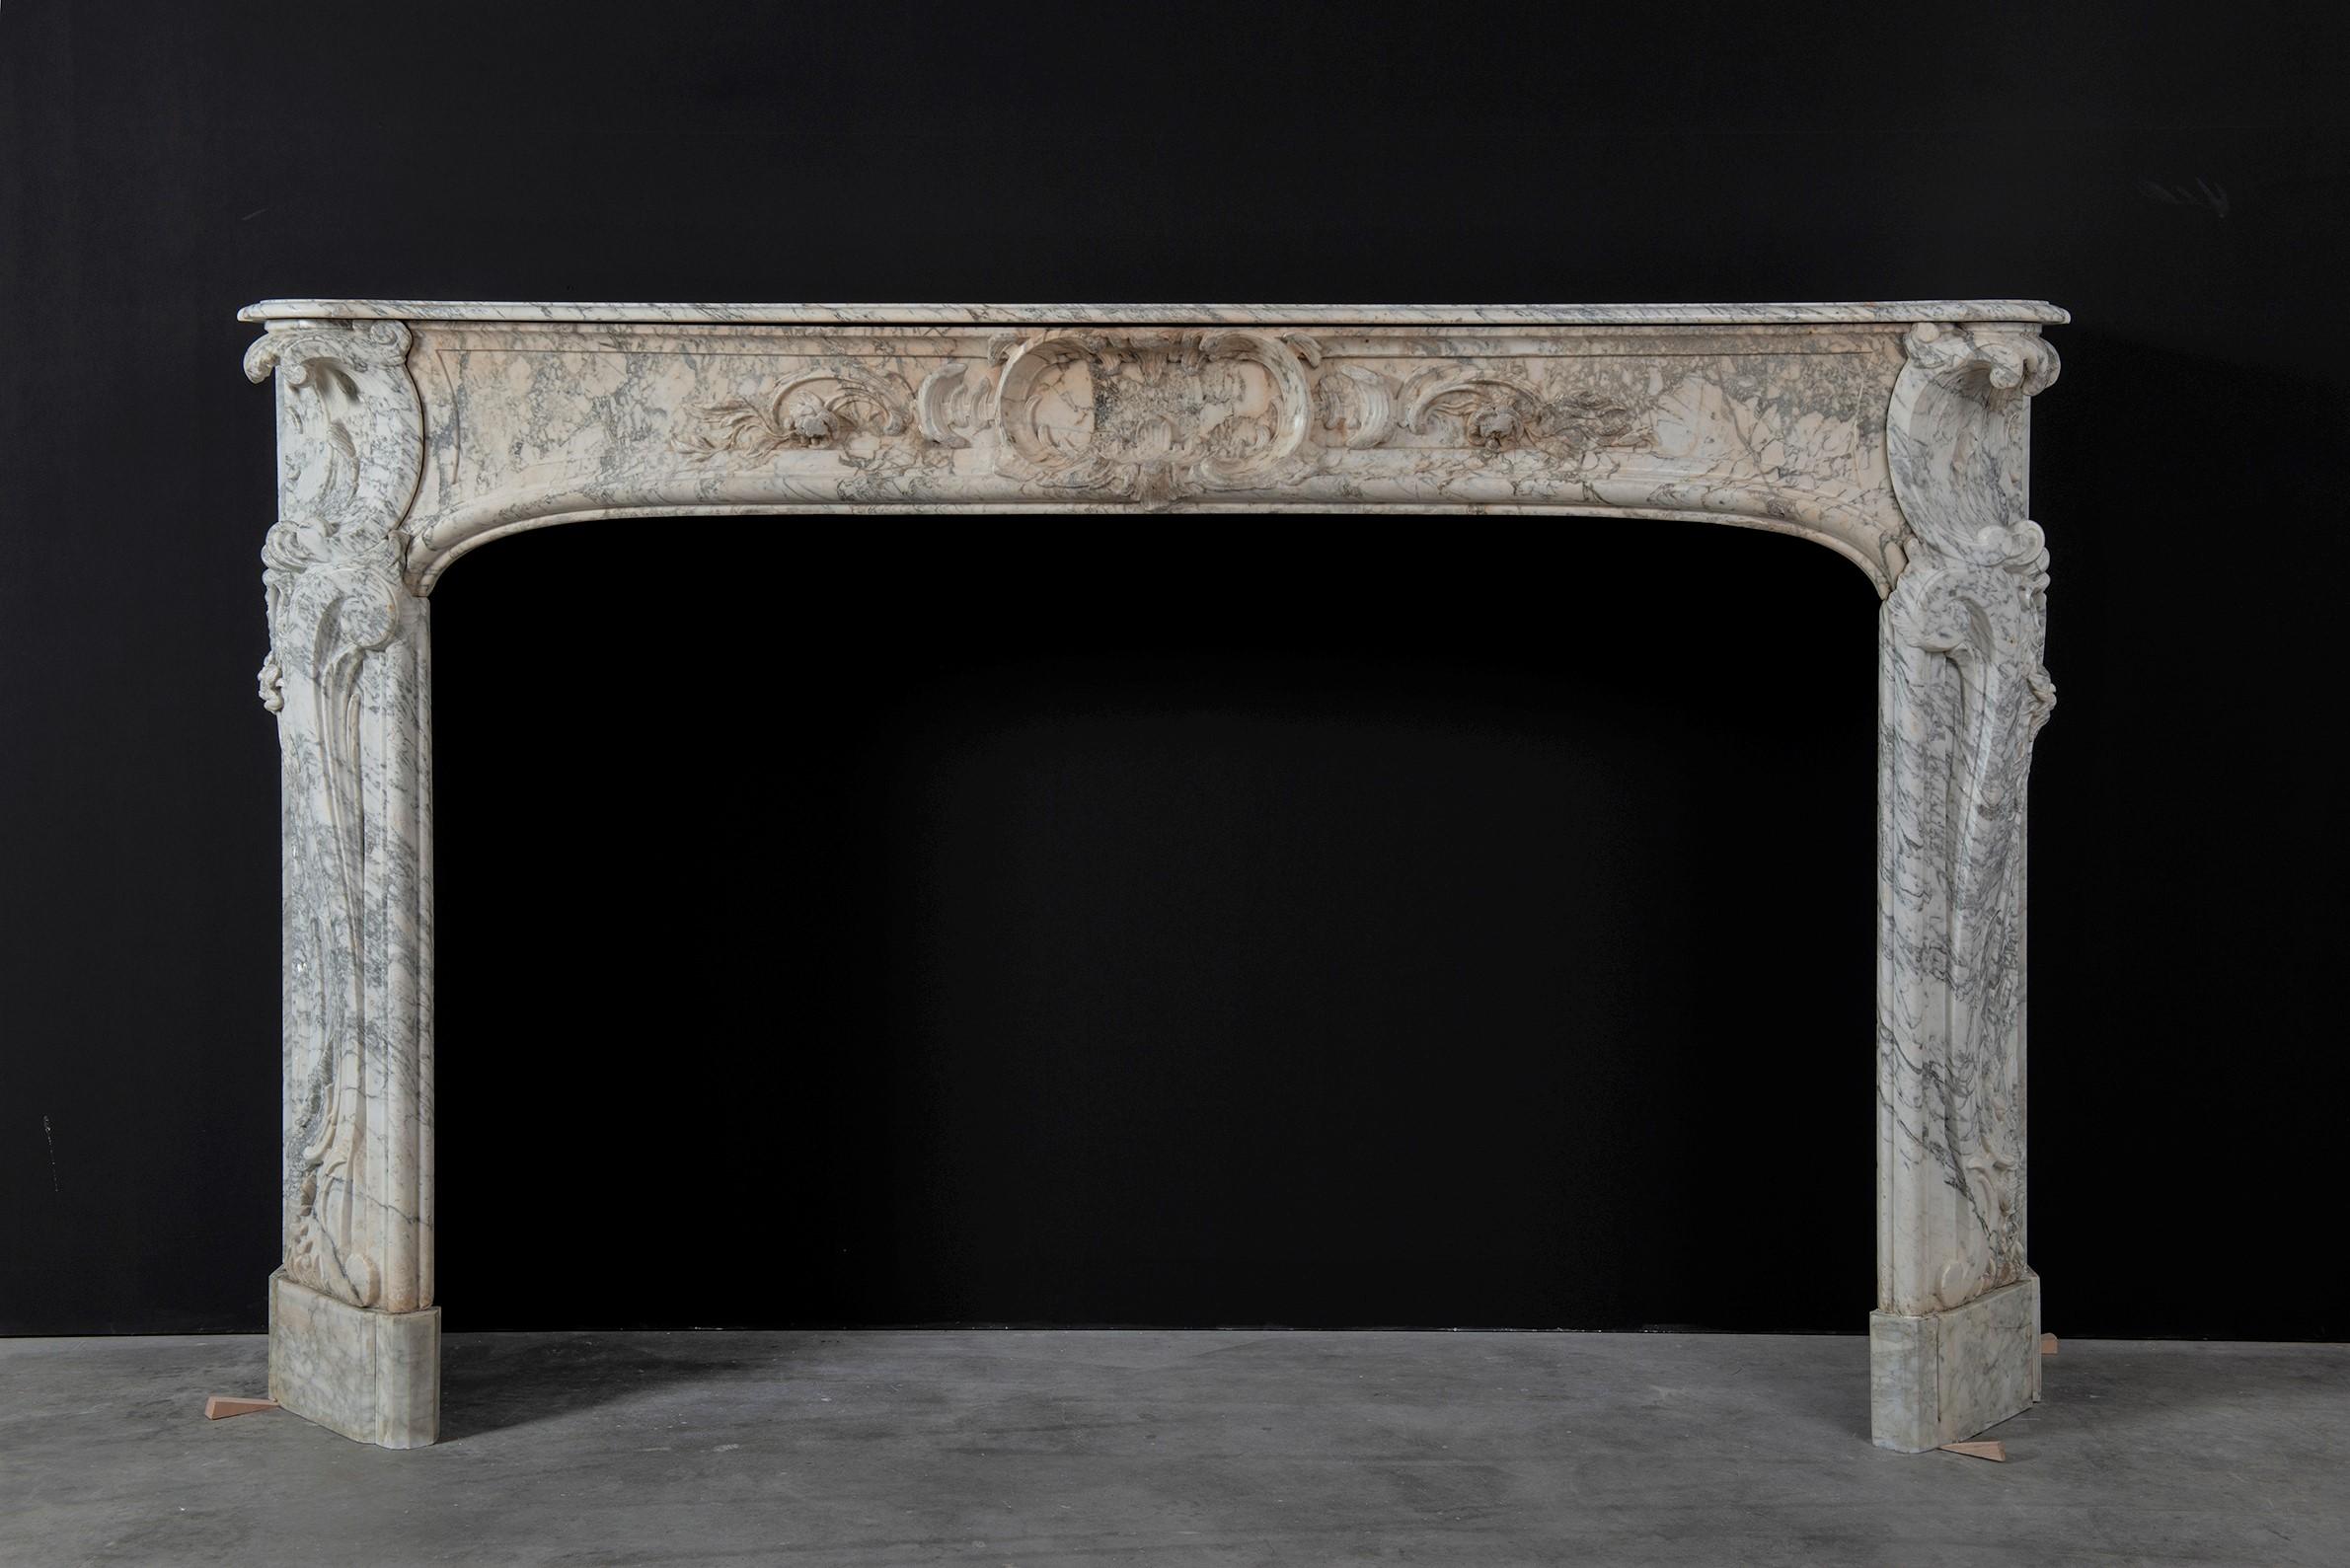 Alluring 18th century Dutch Louis XV fireplace mantel.

Very pleased to offer this alluring Dutch Louis XV fireplace mantel in striking Arabescato marble. 
This soft white toned Italian marble is world famous for its wild greyish veins and its